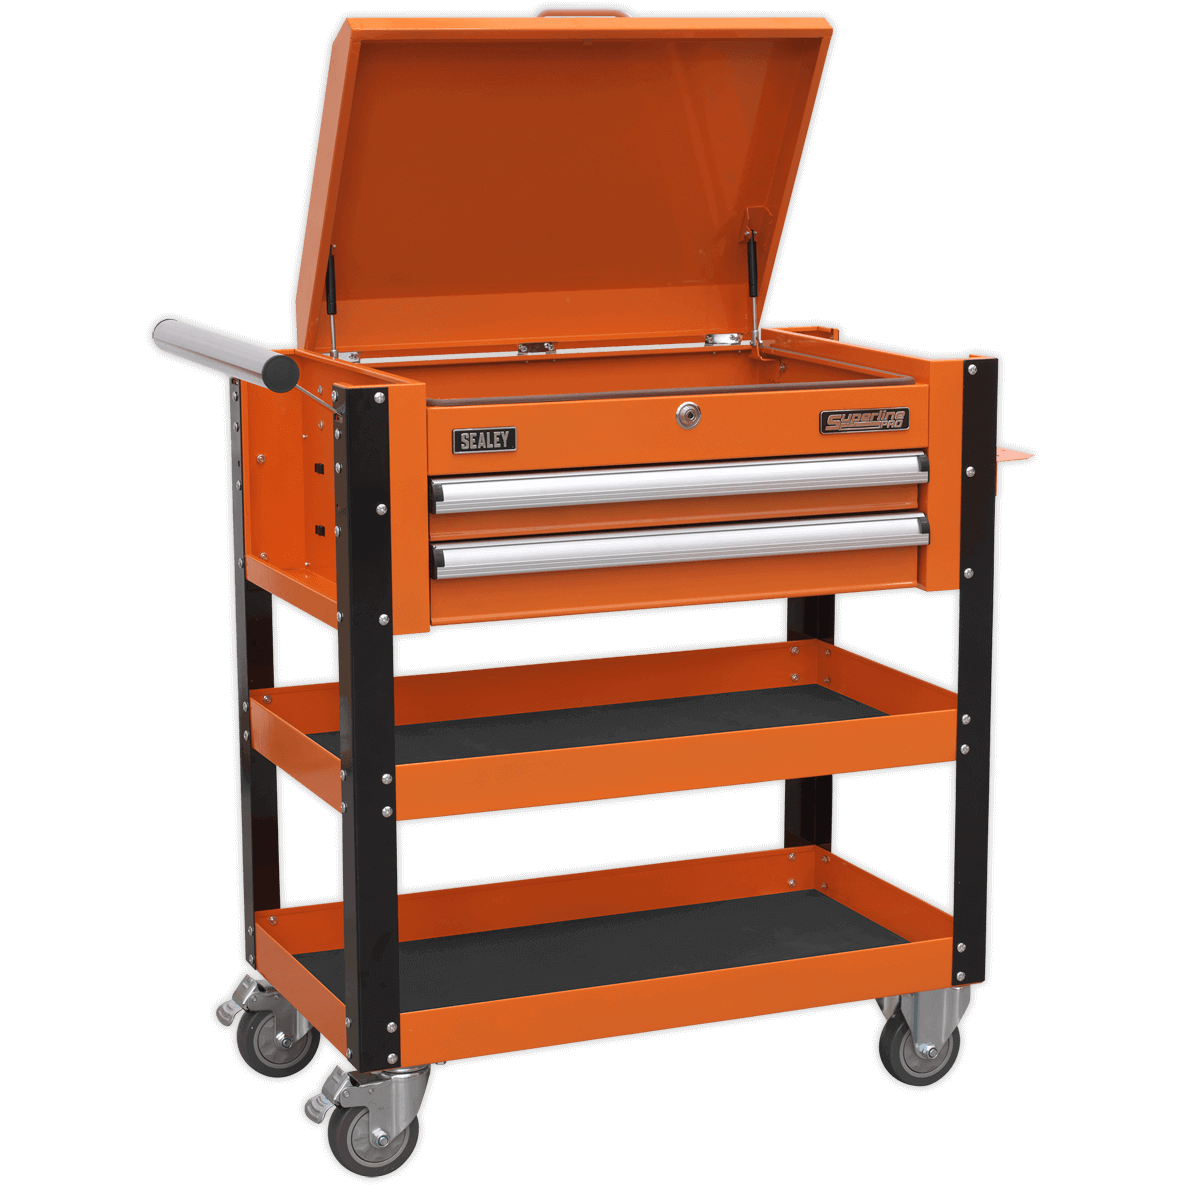 Sealey 2 Drawer Heavy Duty Mobile Tool and Parts Trolley Orange